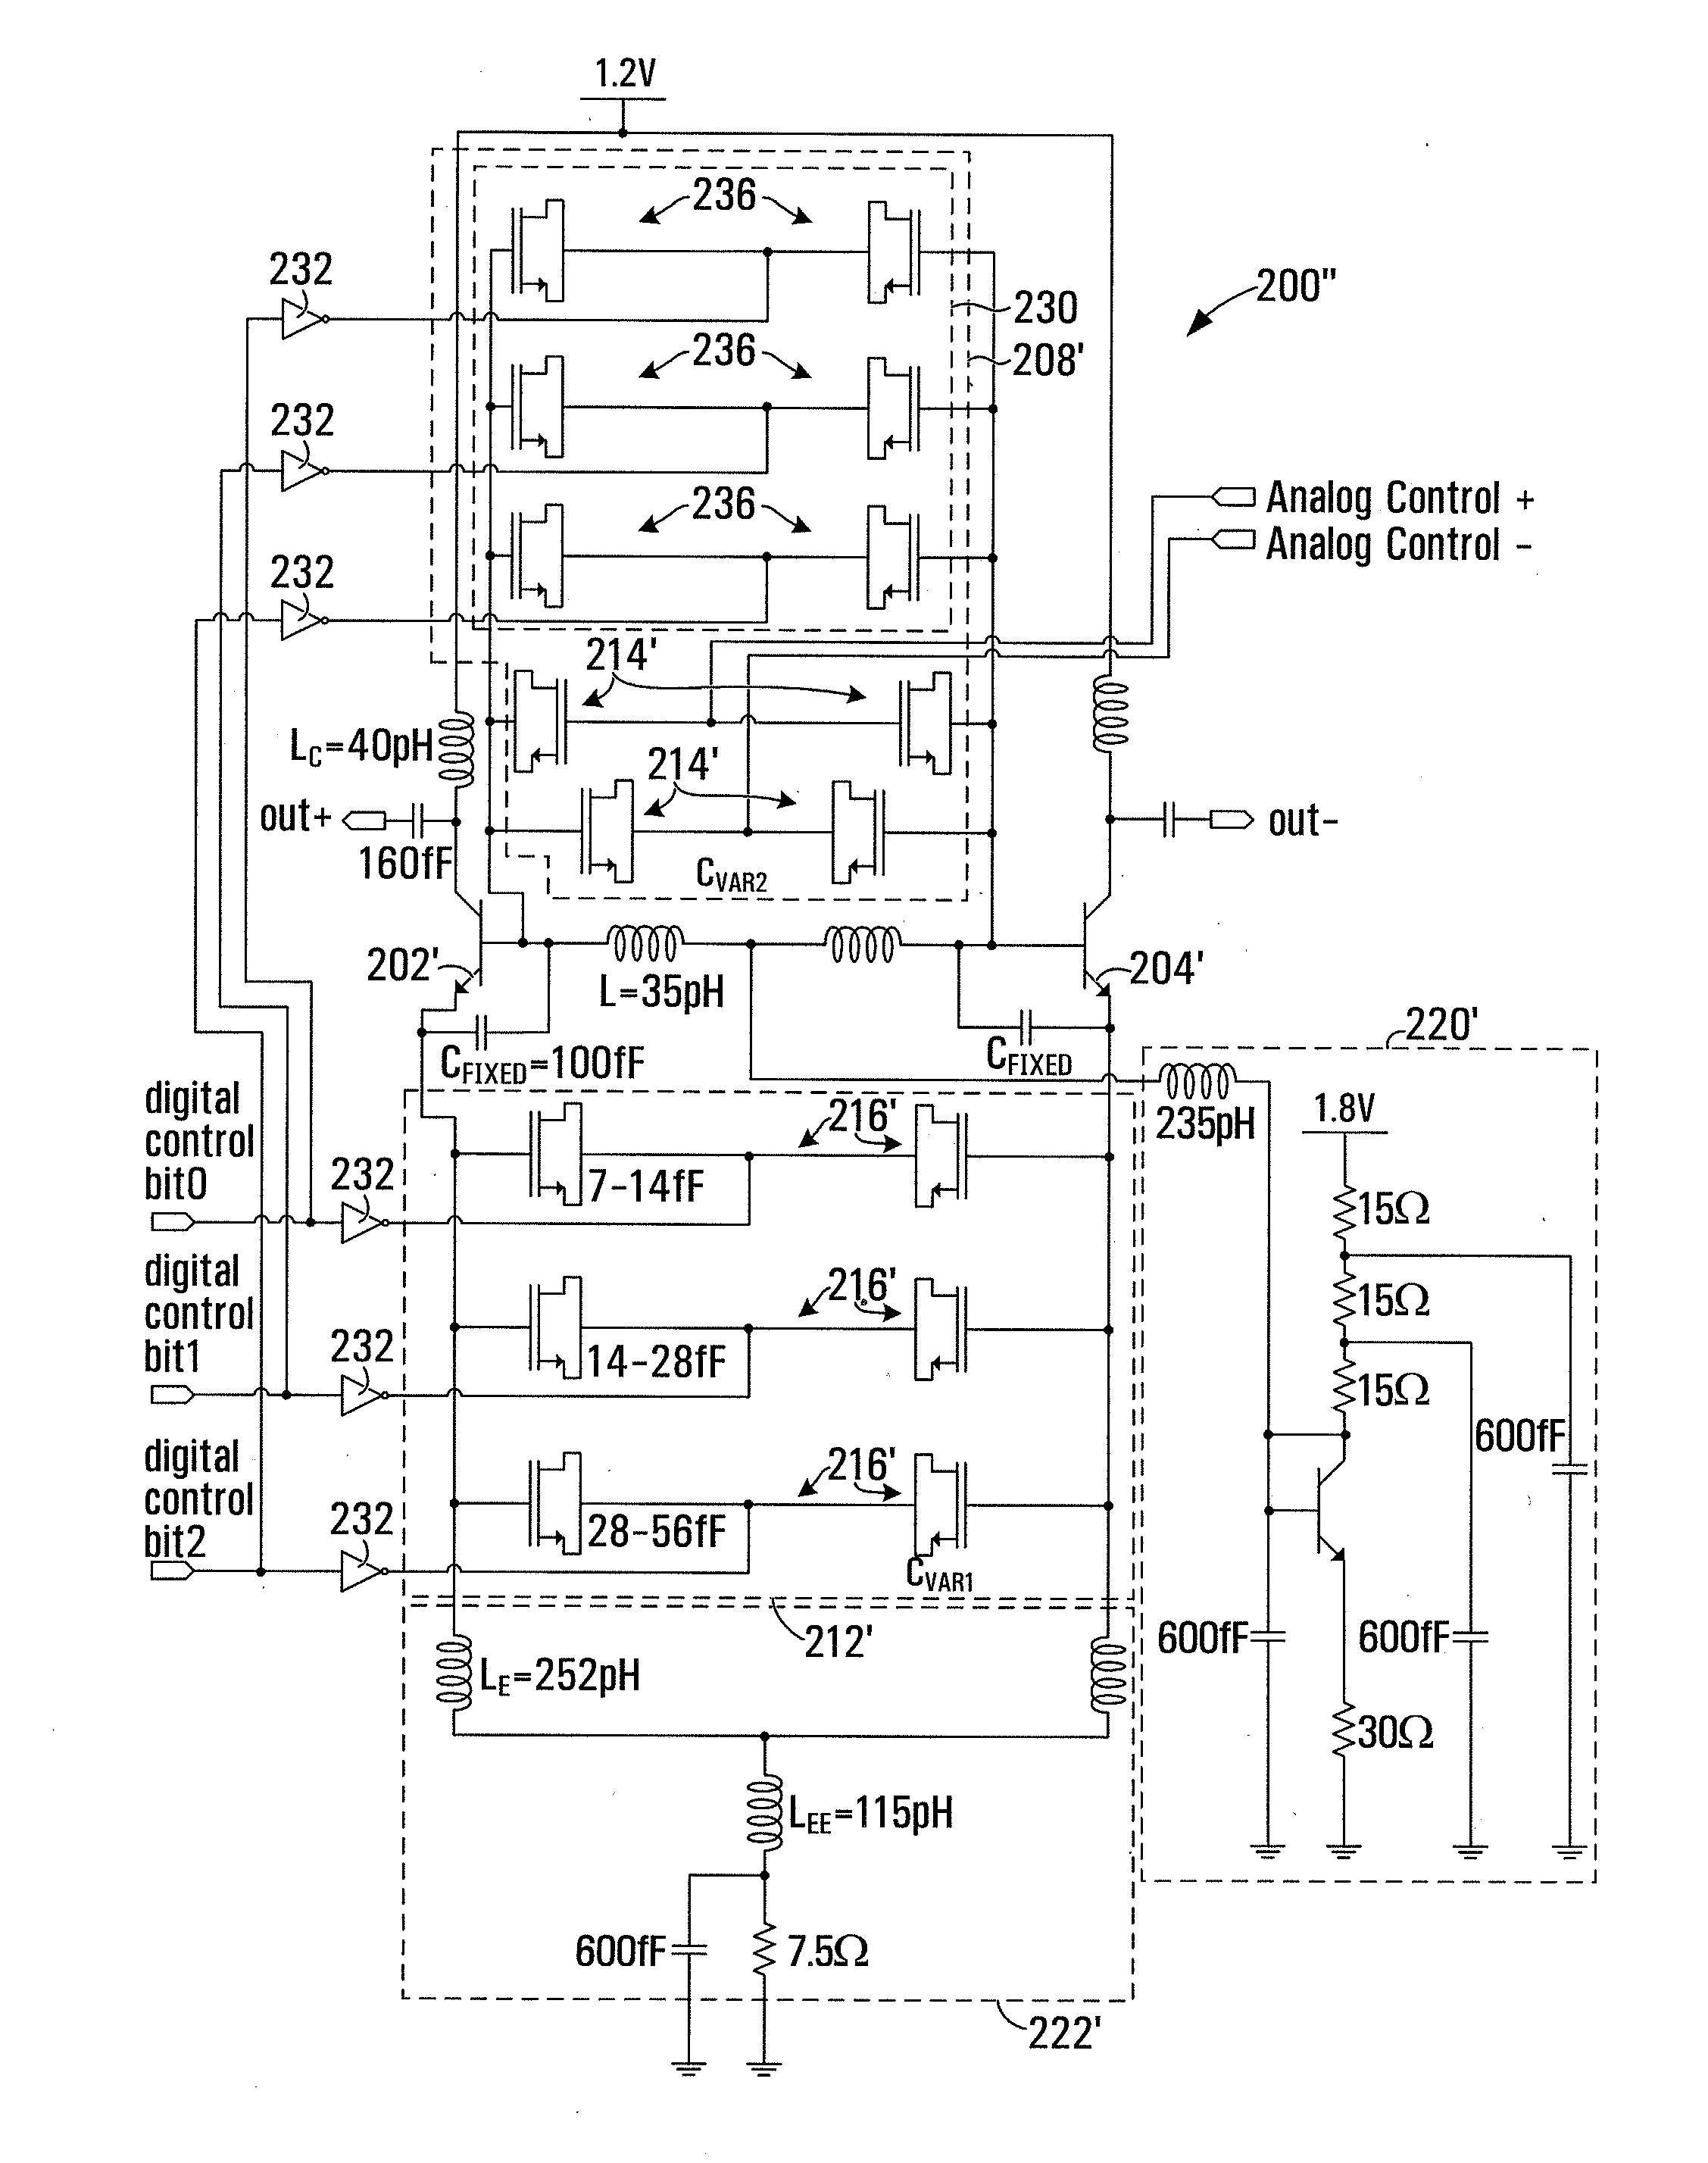 Varactor voltage controlled oscillator (VCO) providing independent coarse and fine frequency tuning